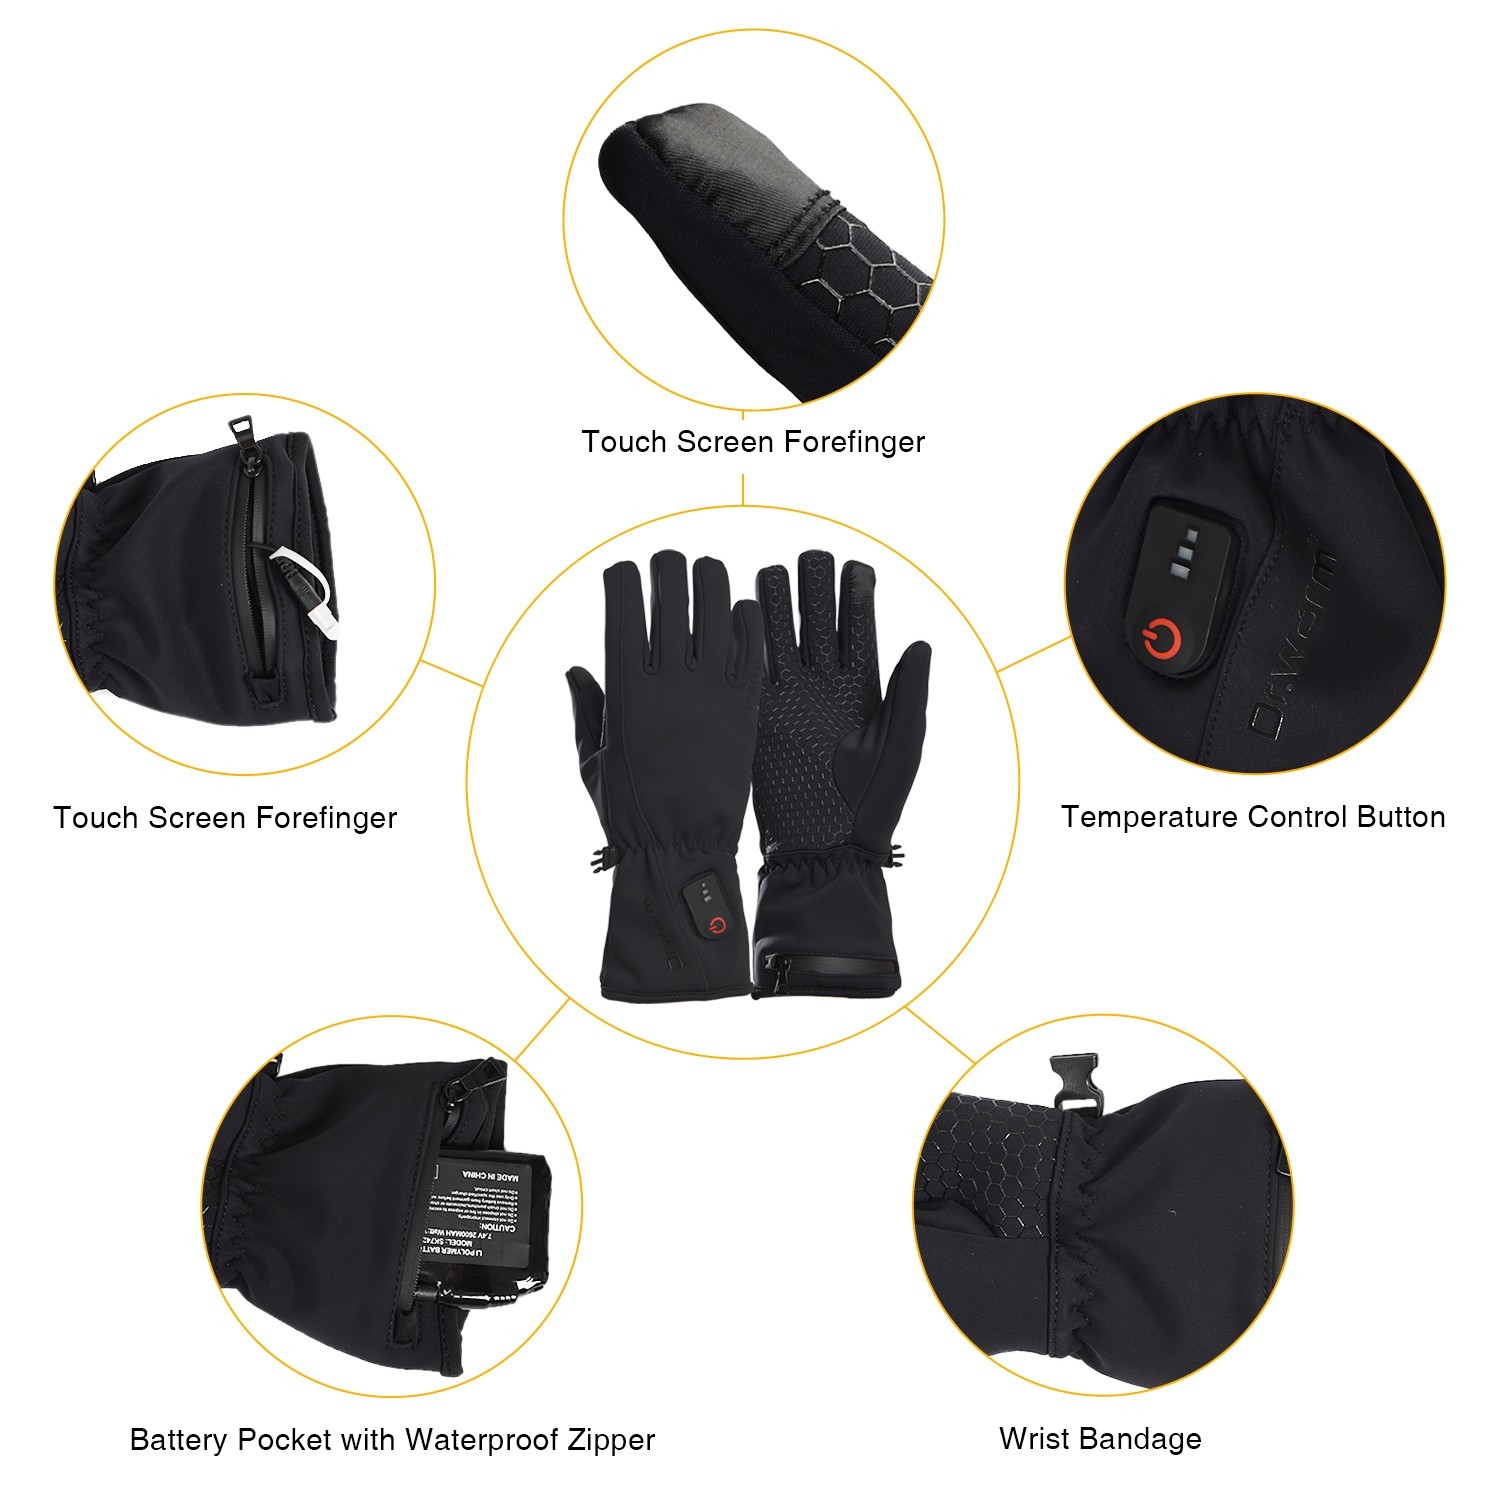 Dr. Warm high quality heated winter gloves for outdoor